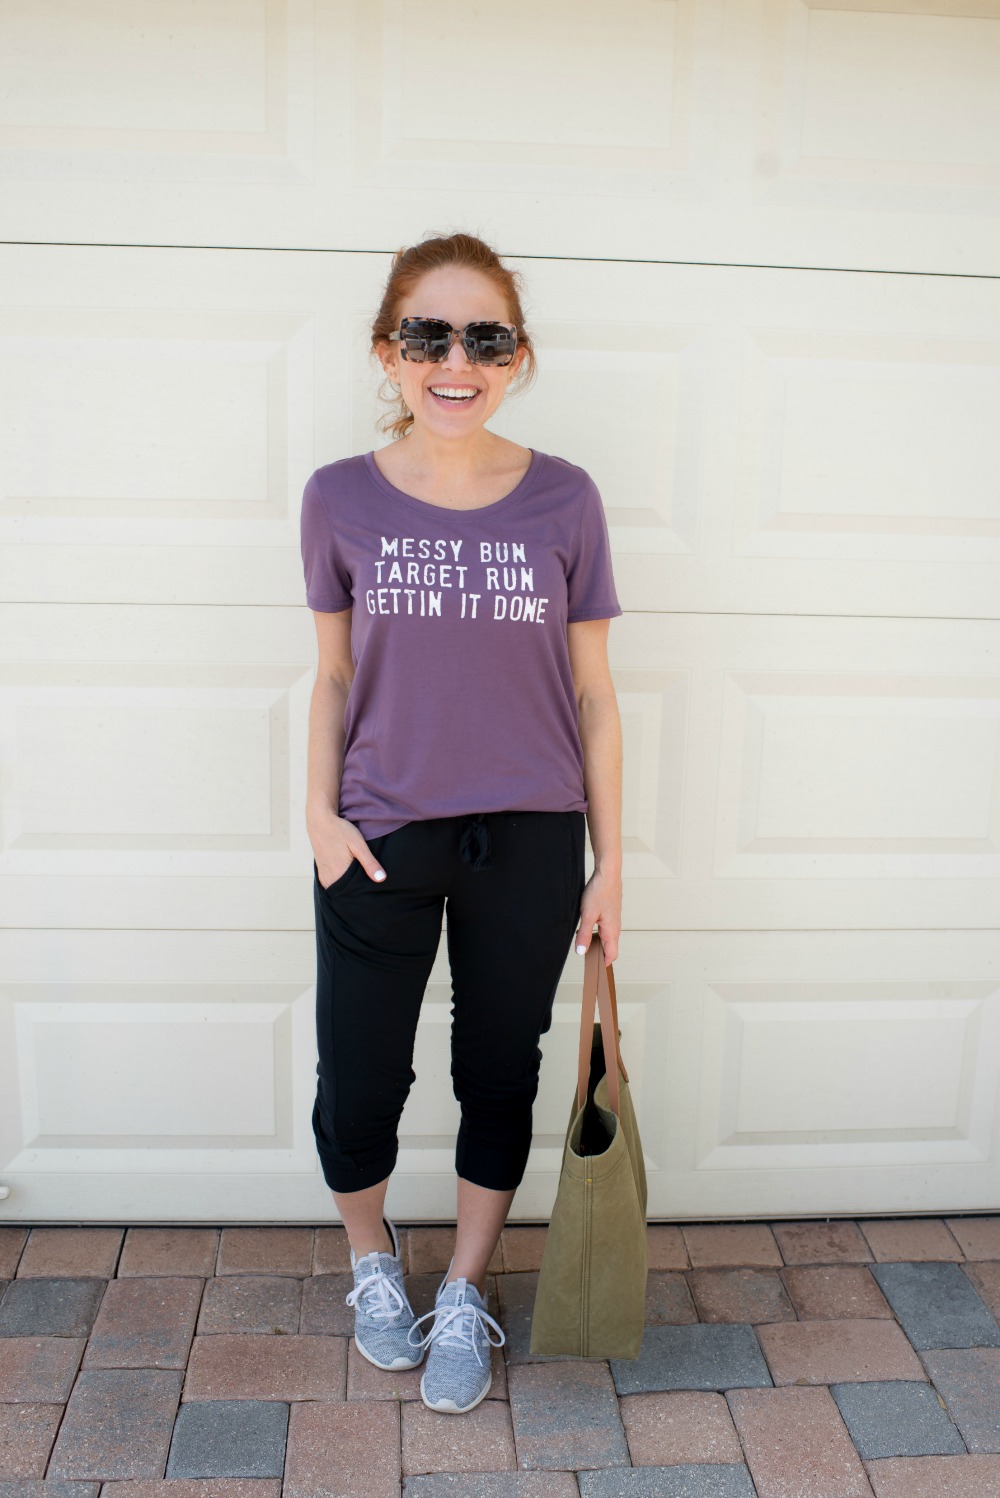 Messy bun, Target run, getting it done! // weekend outfits #realgirlstyle #weekendwear - Casual Weekend Outfit featured by popular Florida style blogger The Modern Savvy